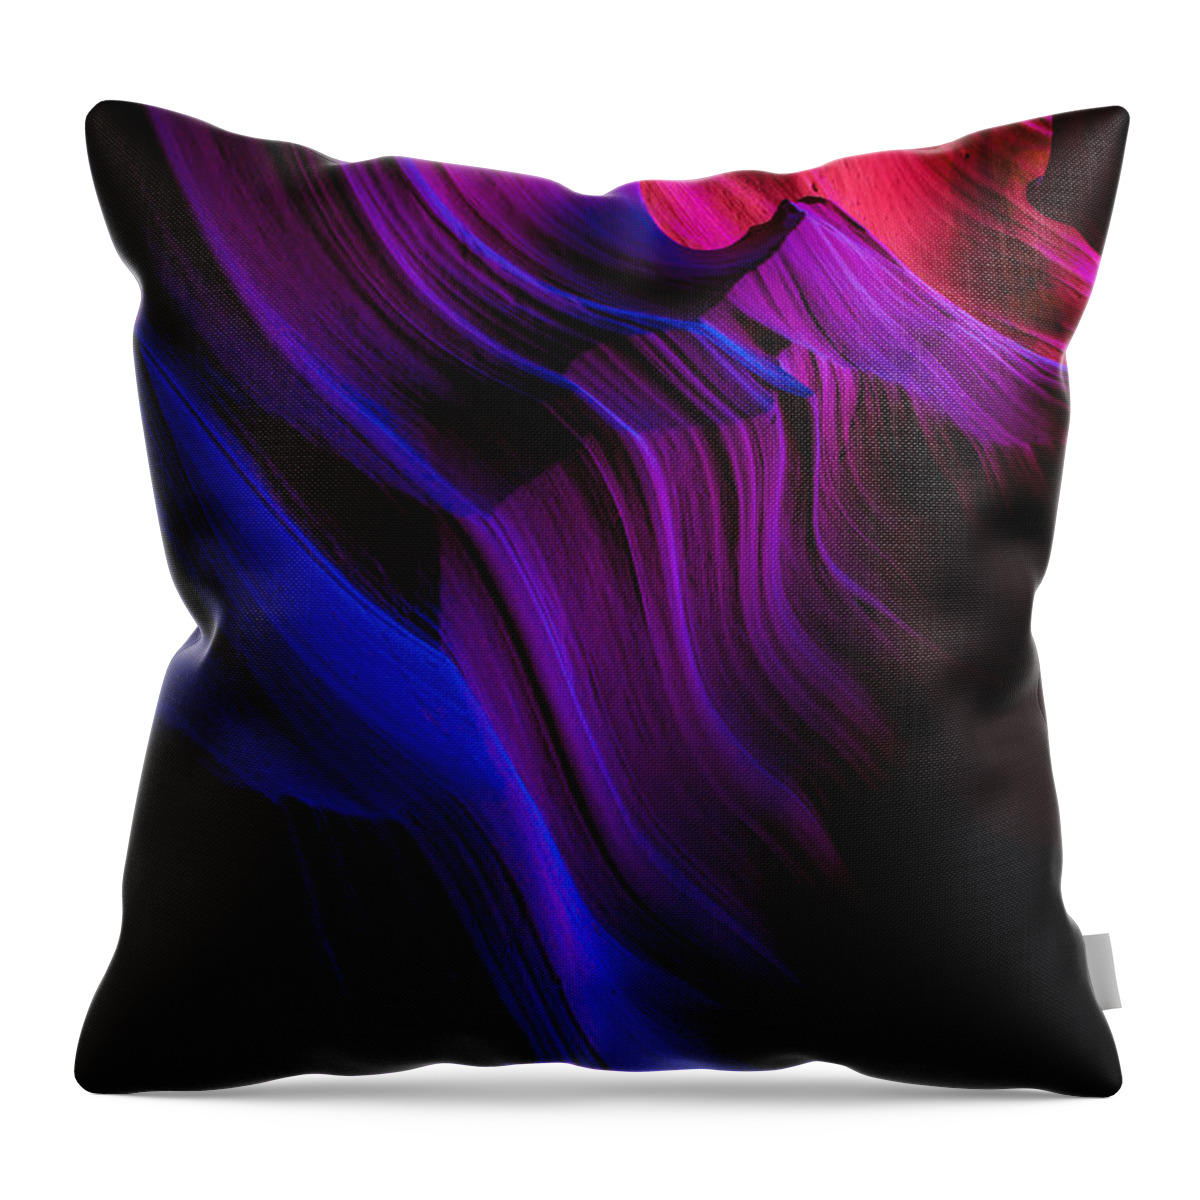 Luminary Peace Throw Pillow featuring the photograph Luminary Peace by Chad Dutson